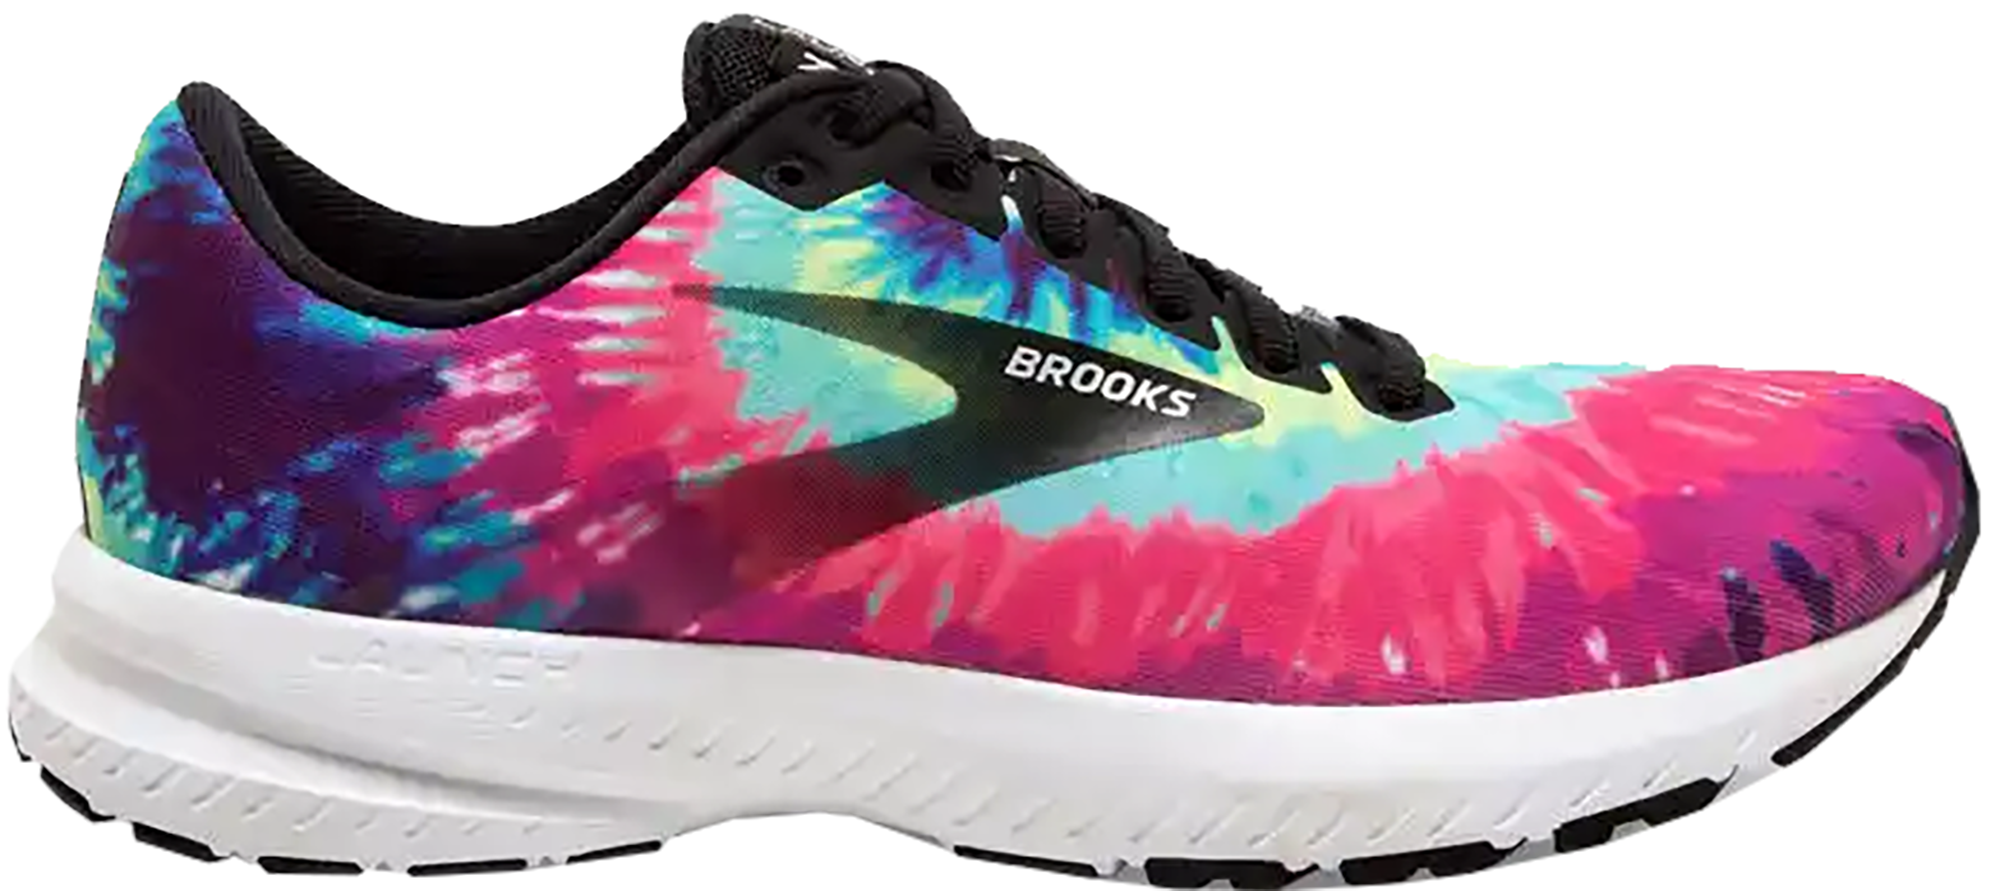 brooks launch 5 rock and roll